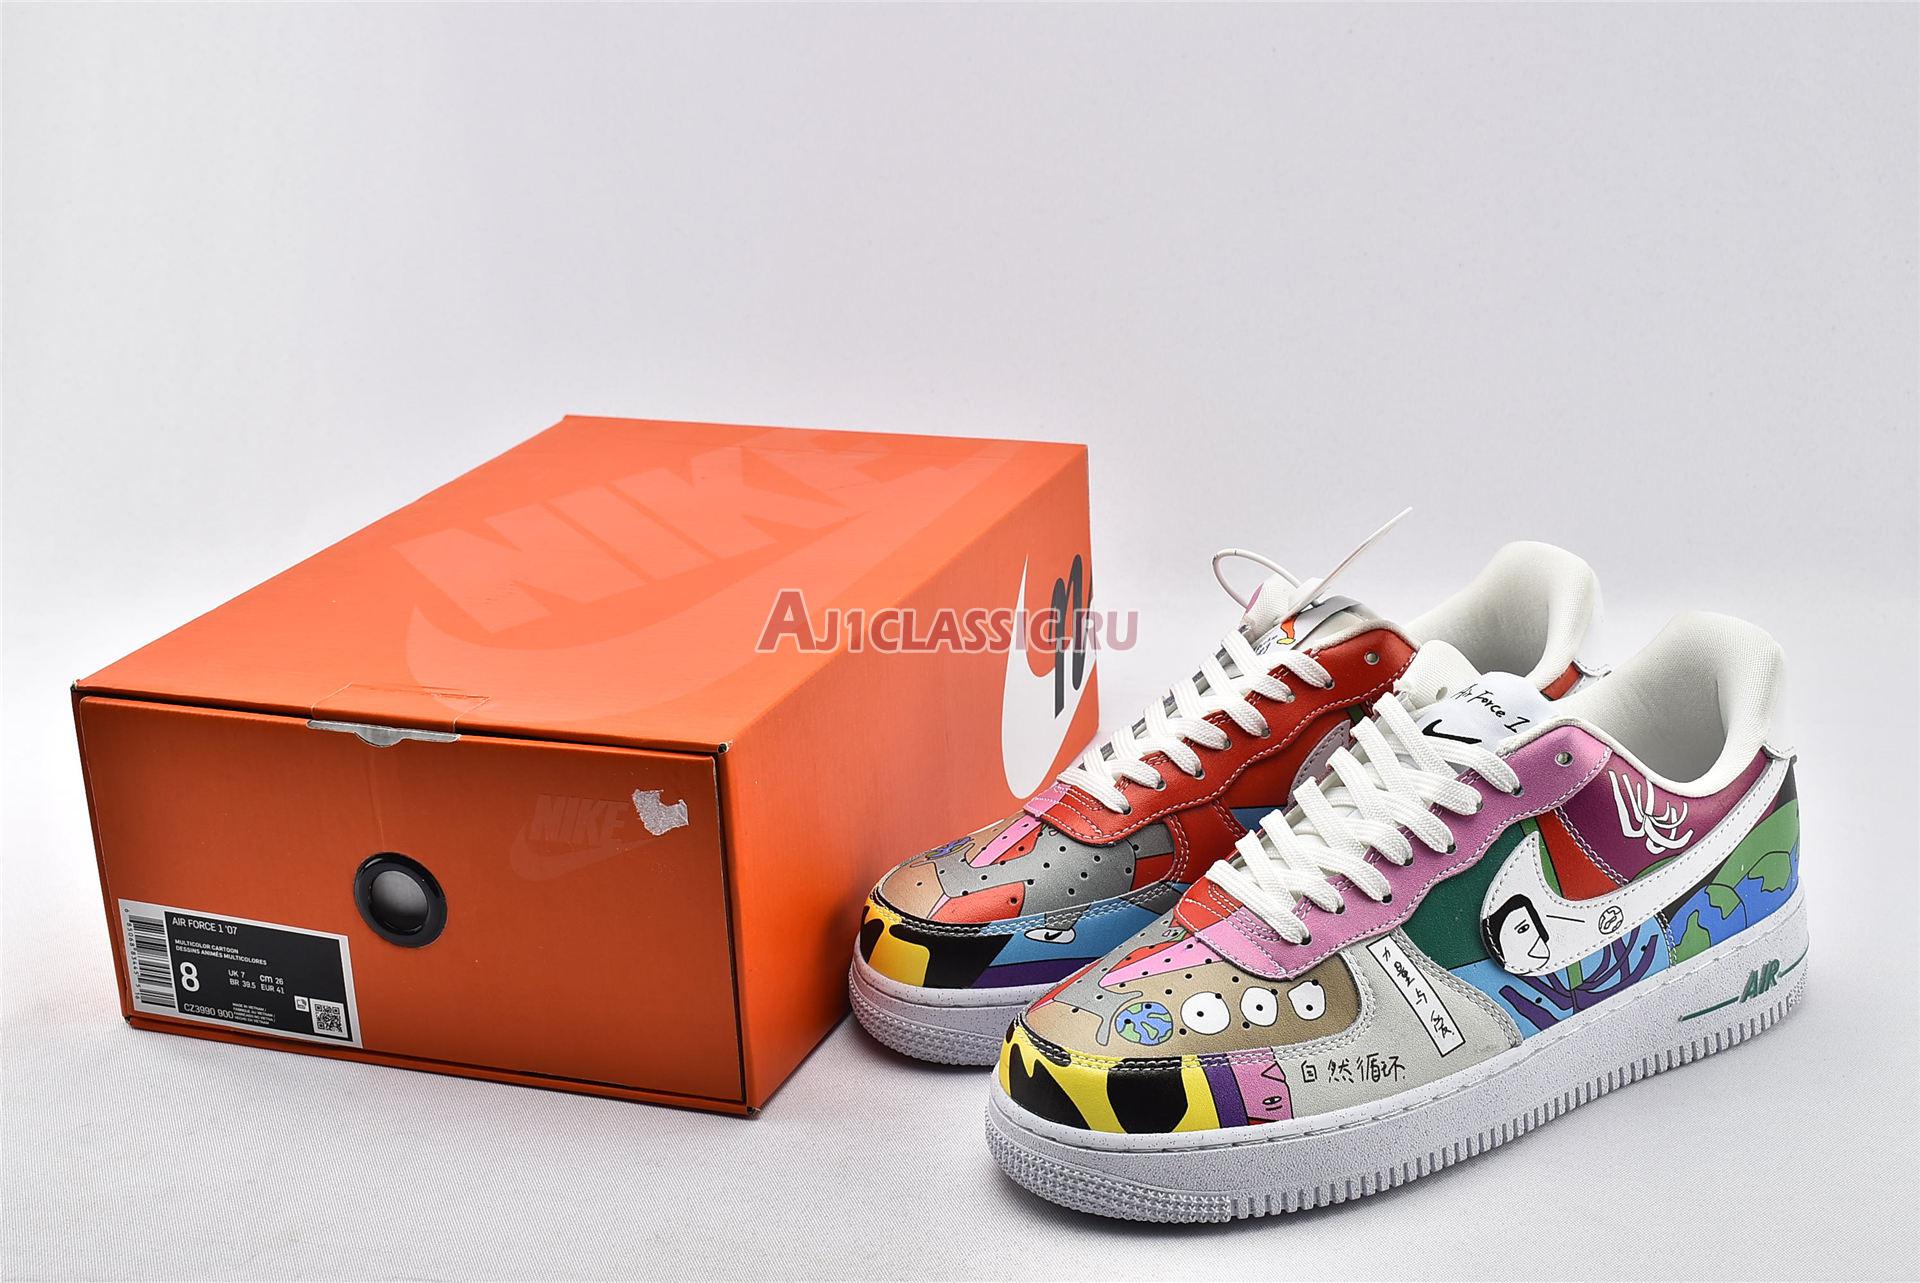 Ruohan Wang x Nike Air Force 1 Flyleather CZ3990-900 Red/Pink/Green/Blue/White Sneakers